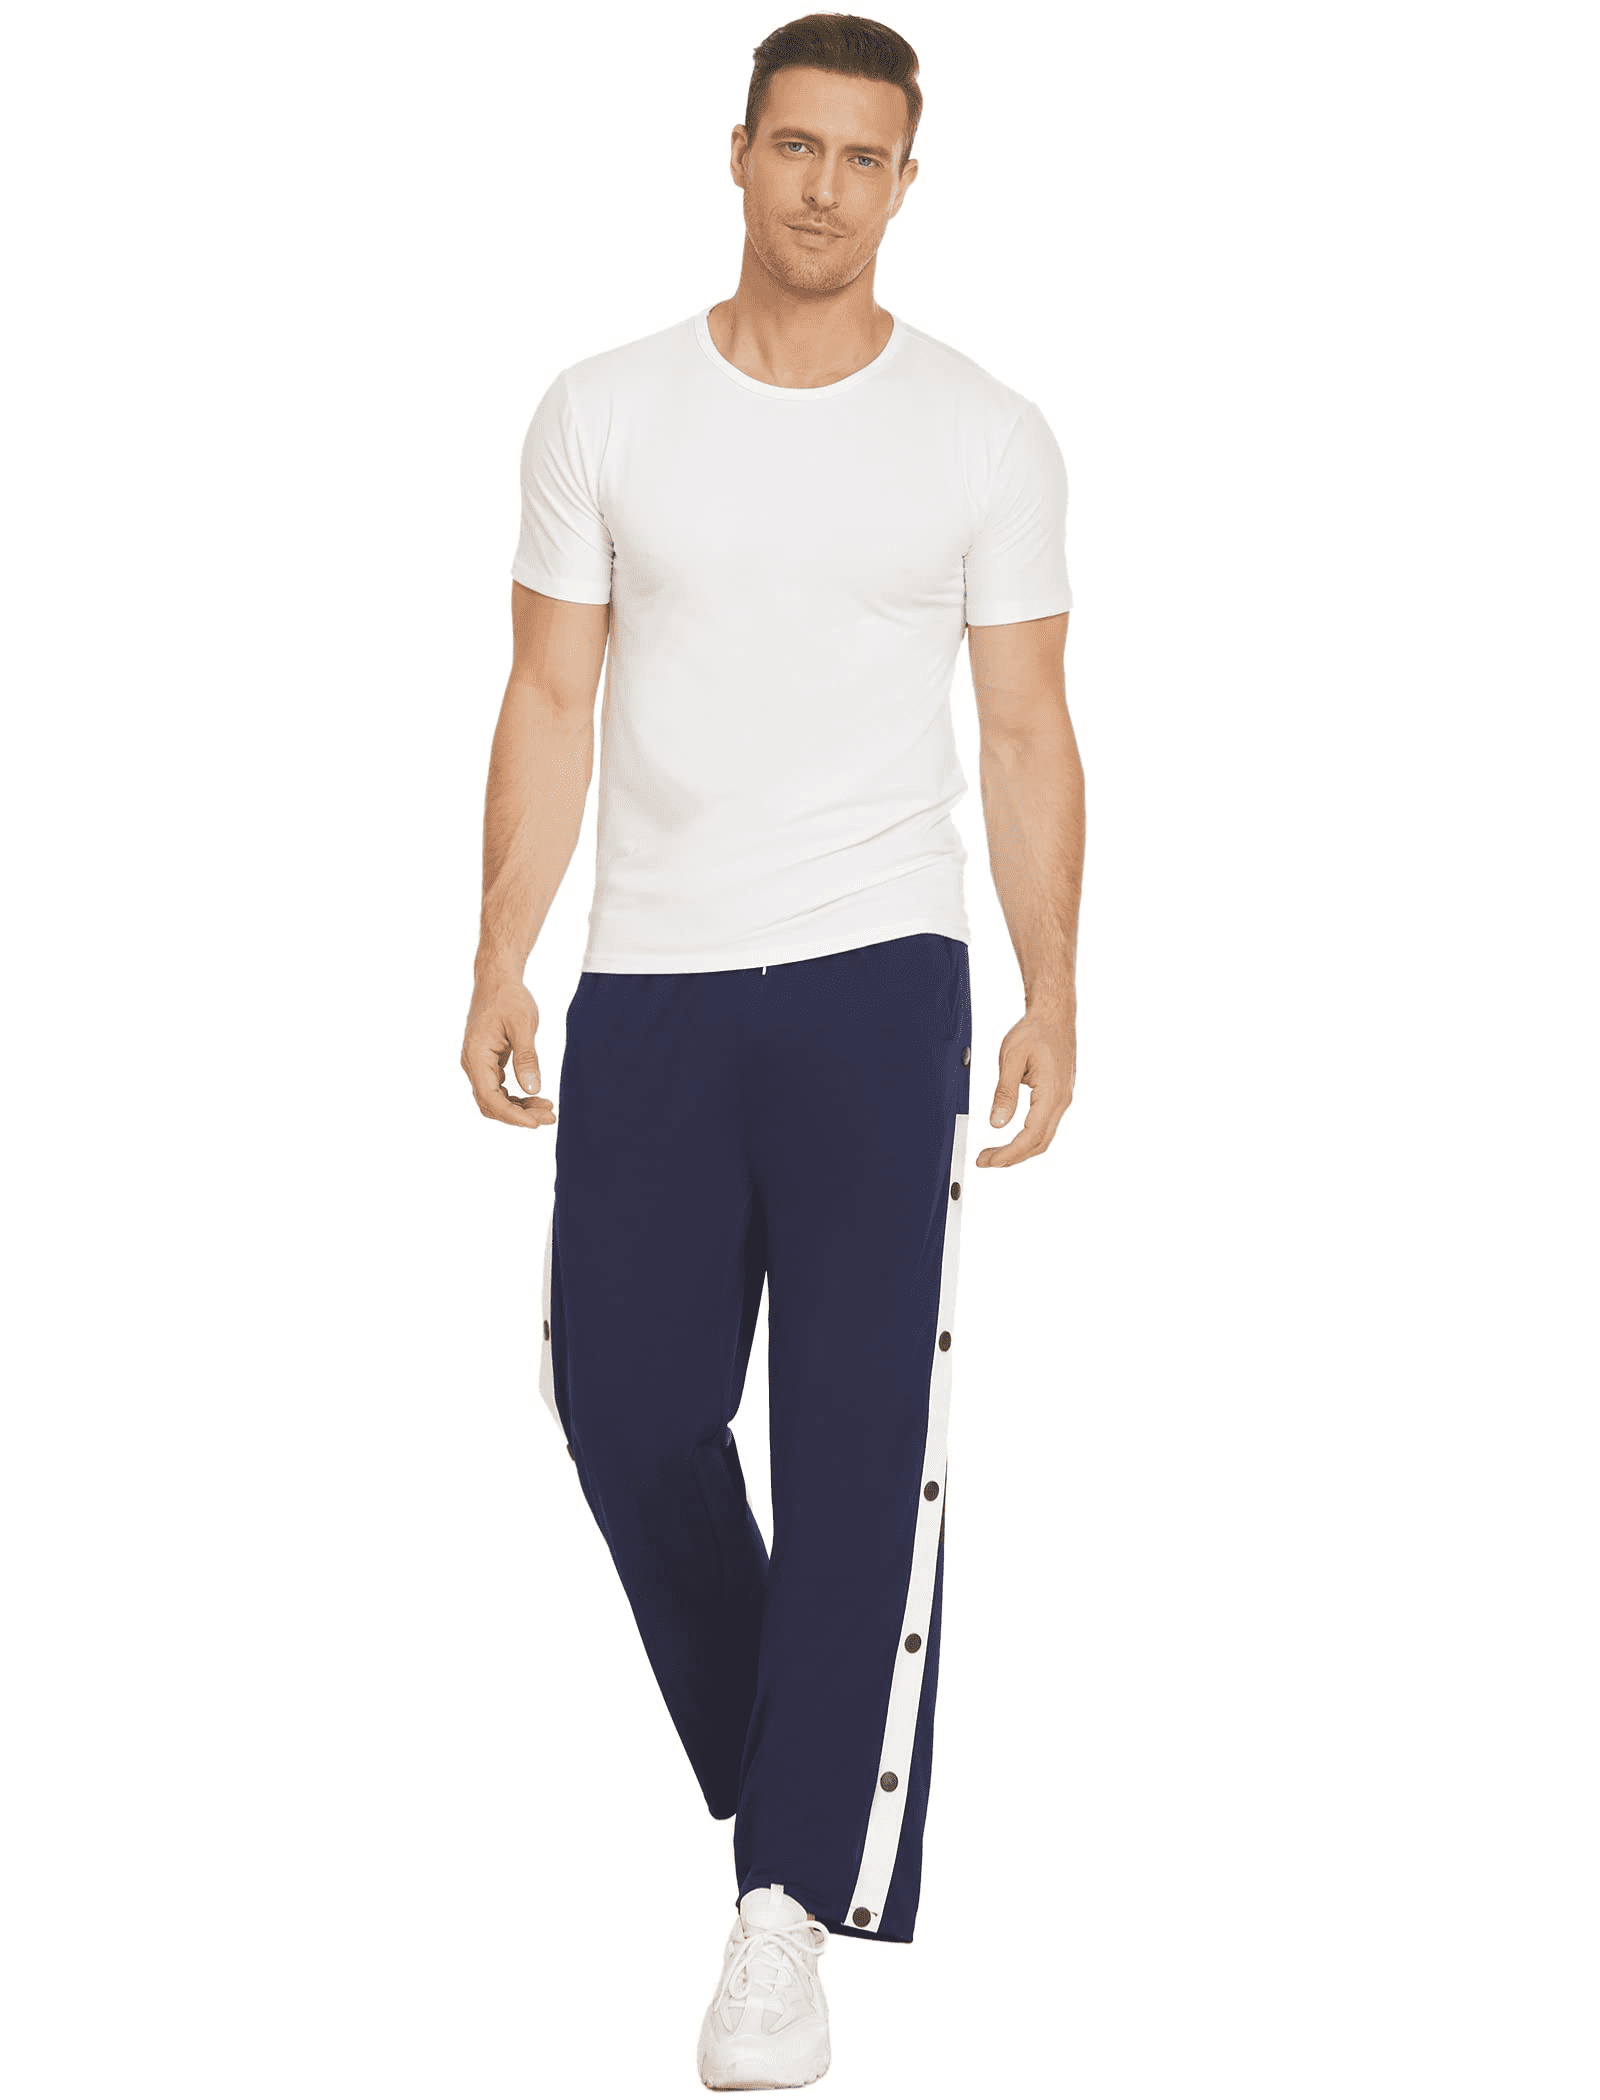  Men's Tear Away Basketball Pants High Split Snap Button Casual  Post-Surgery Sweatpants with Pockets : Clothing, Shoes & Jewelry